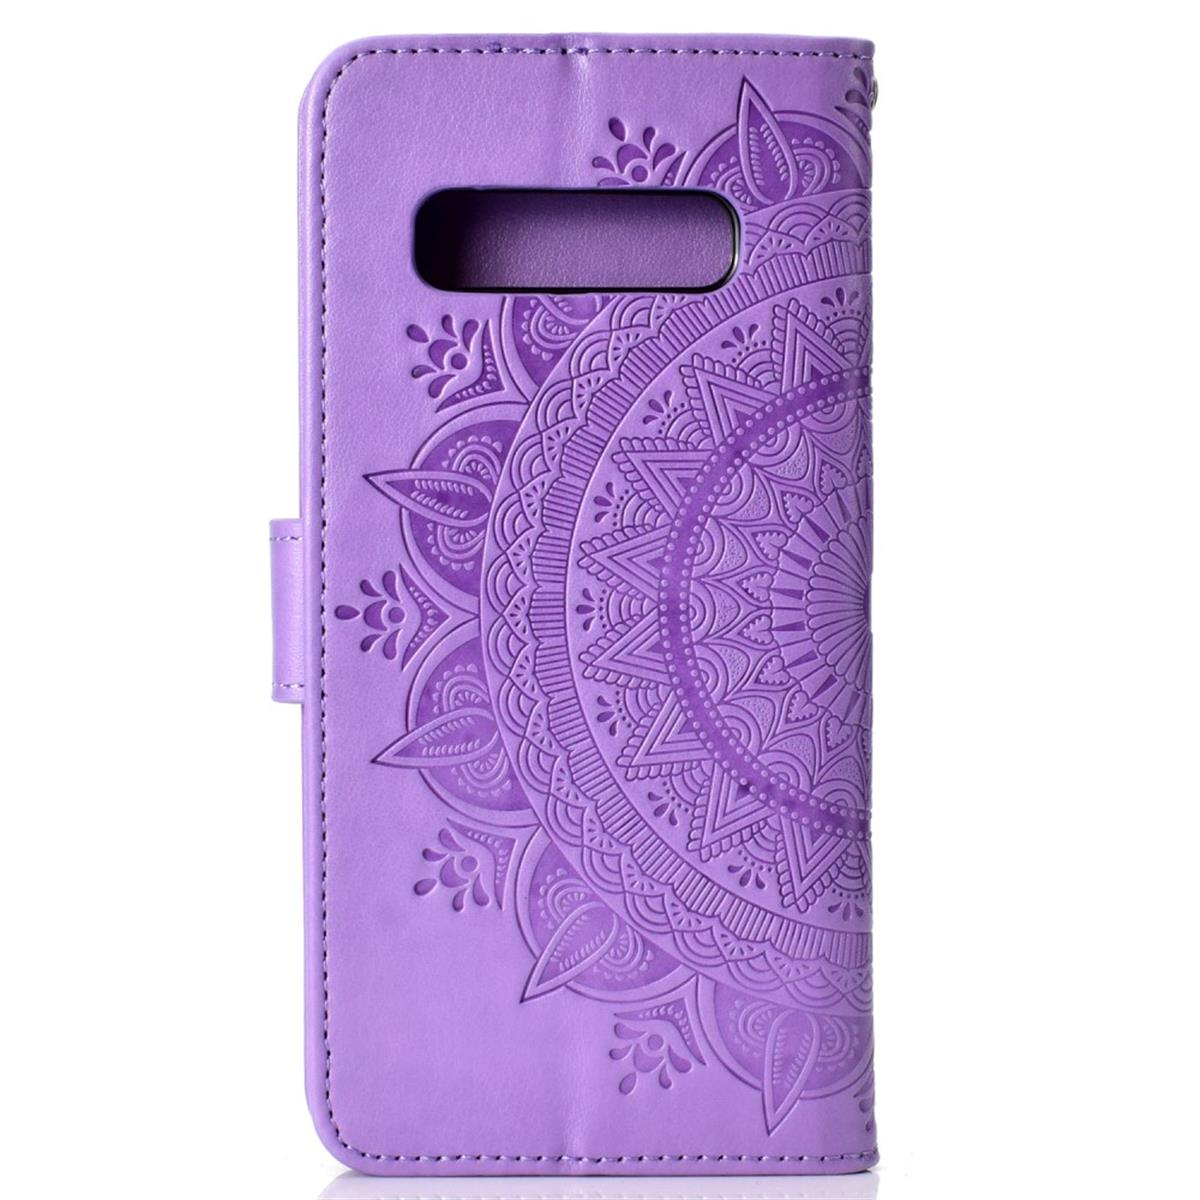 COVERKINGZ Klapphülle mit Mandala Muster, S10, Galaxy Lila Bookcover, Samsung